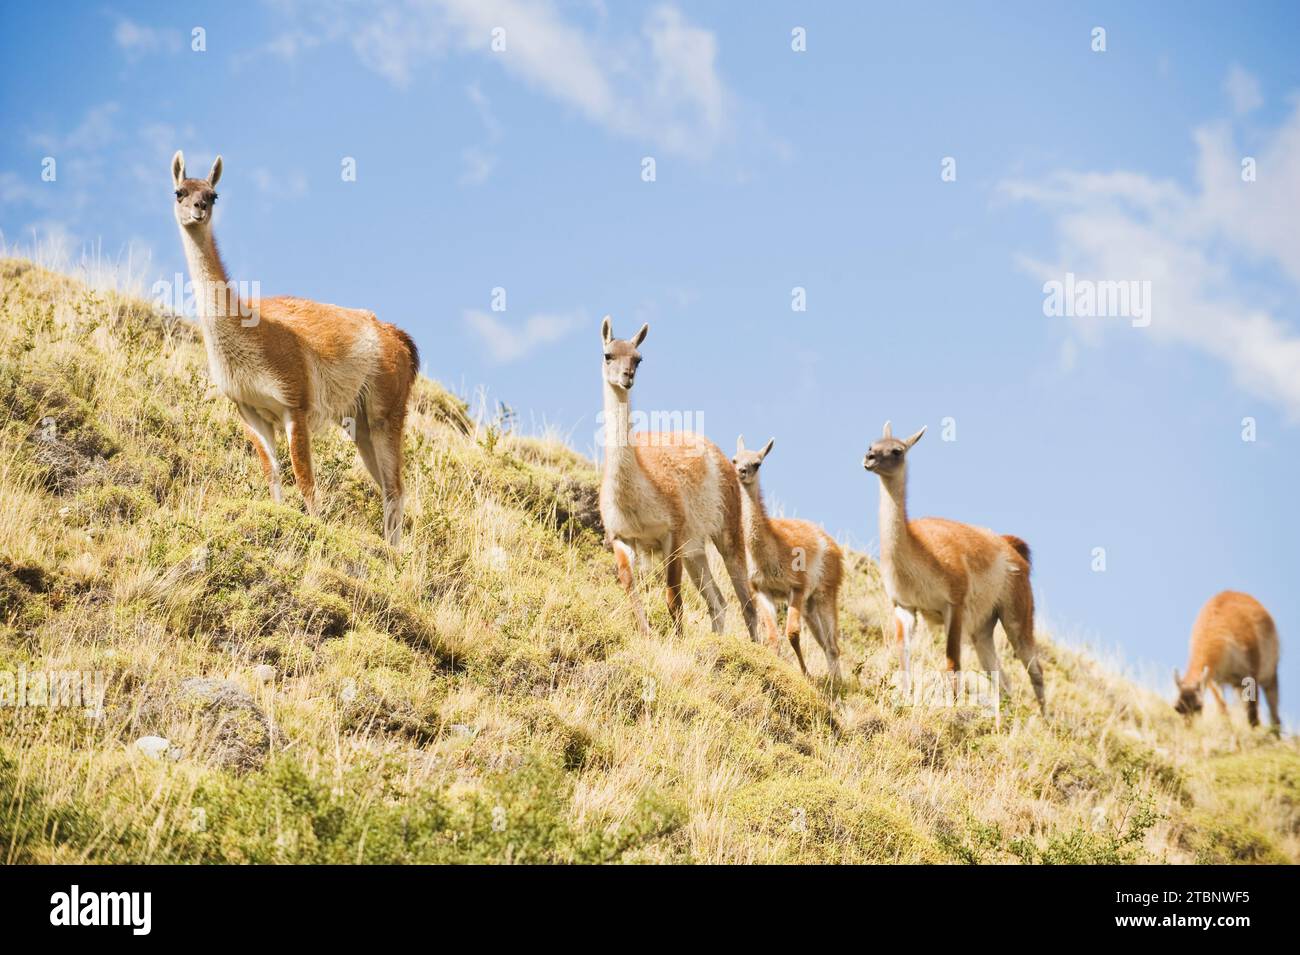 A herd of guanacos walking near the Rio Paine in Las Torres Del Paine National Park, Chile. Stock Photo